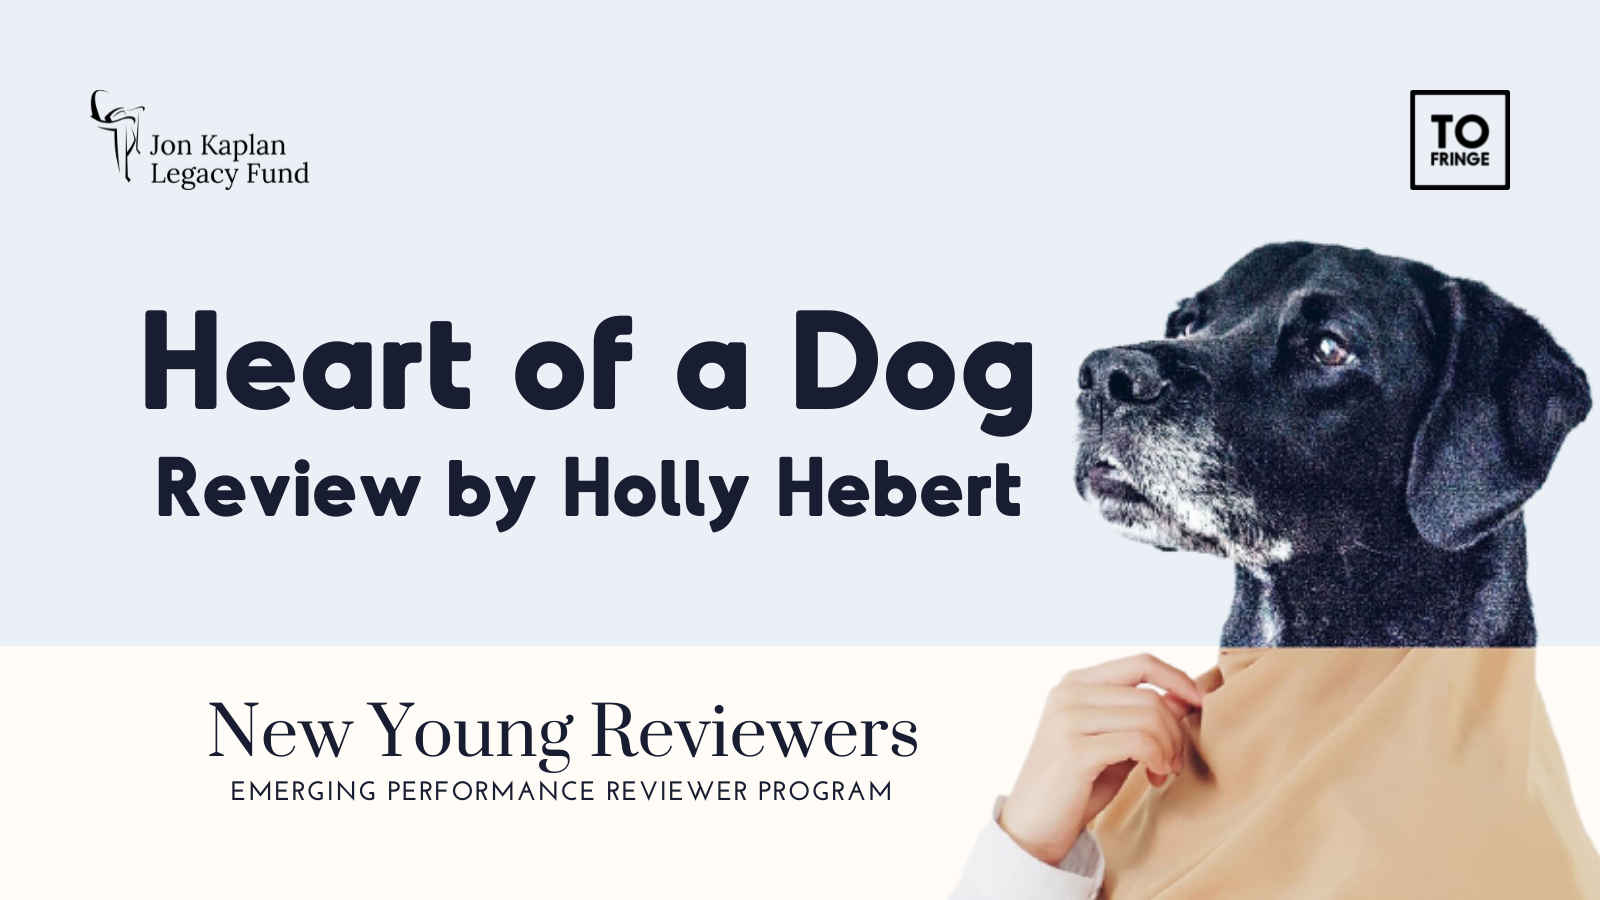 New Young Reviewers banner that reads “Heart of a Dog. Review by Holly Hebert.” with partner logos